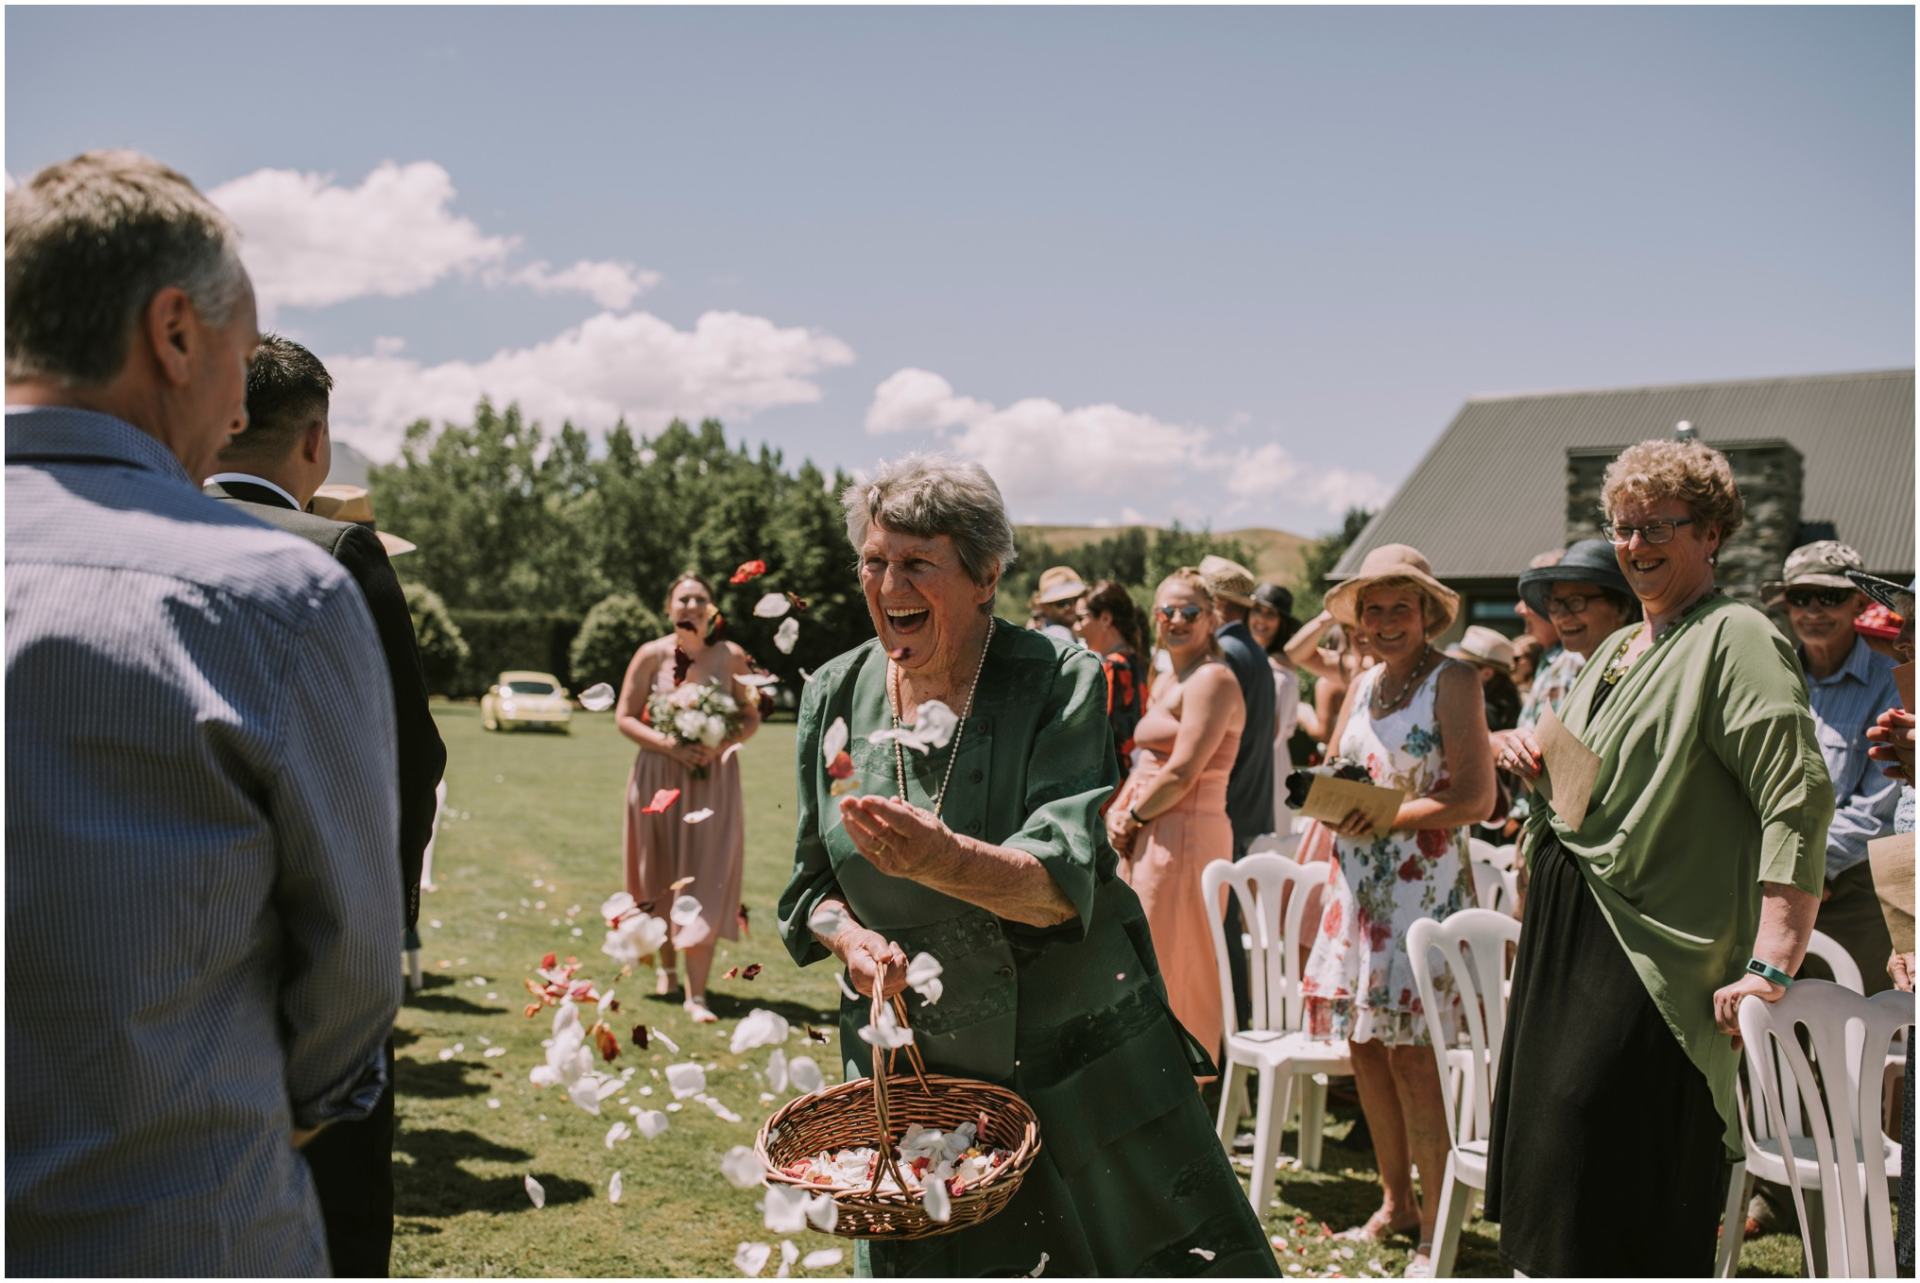 Charlotte Kiri Photography - Wedding Photography of a Mother of the bridal party wearing a forest green dress, scattering red and white rose petals as the bride and groom walk down the aisle in Queenstown, New Zealand.